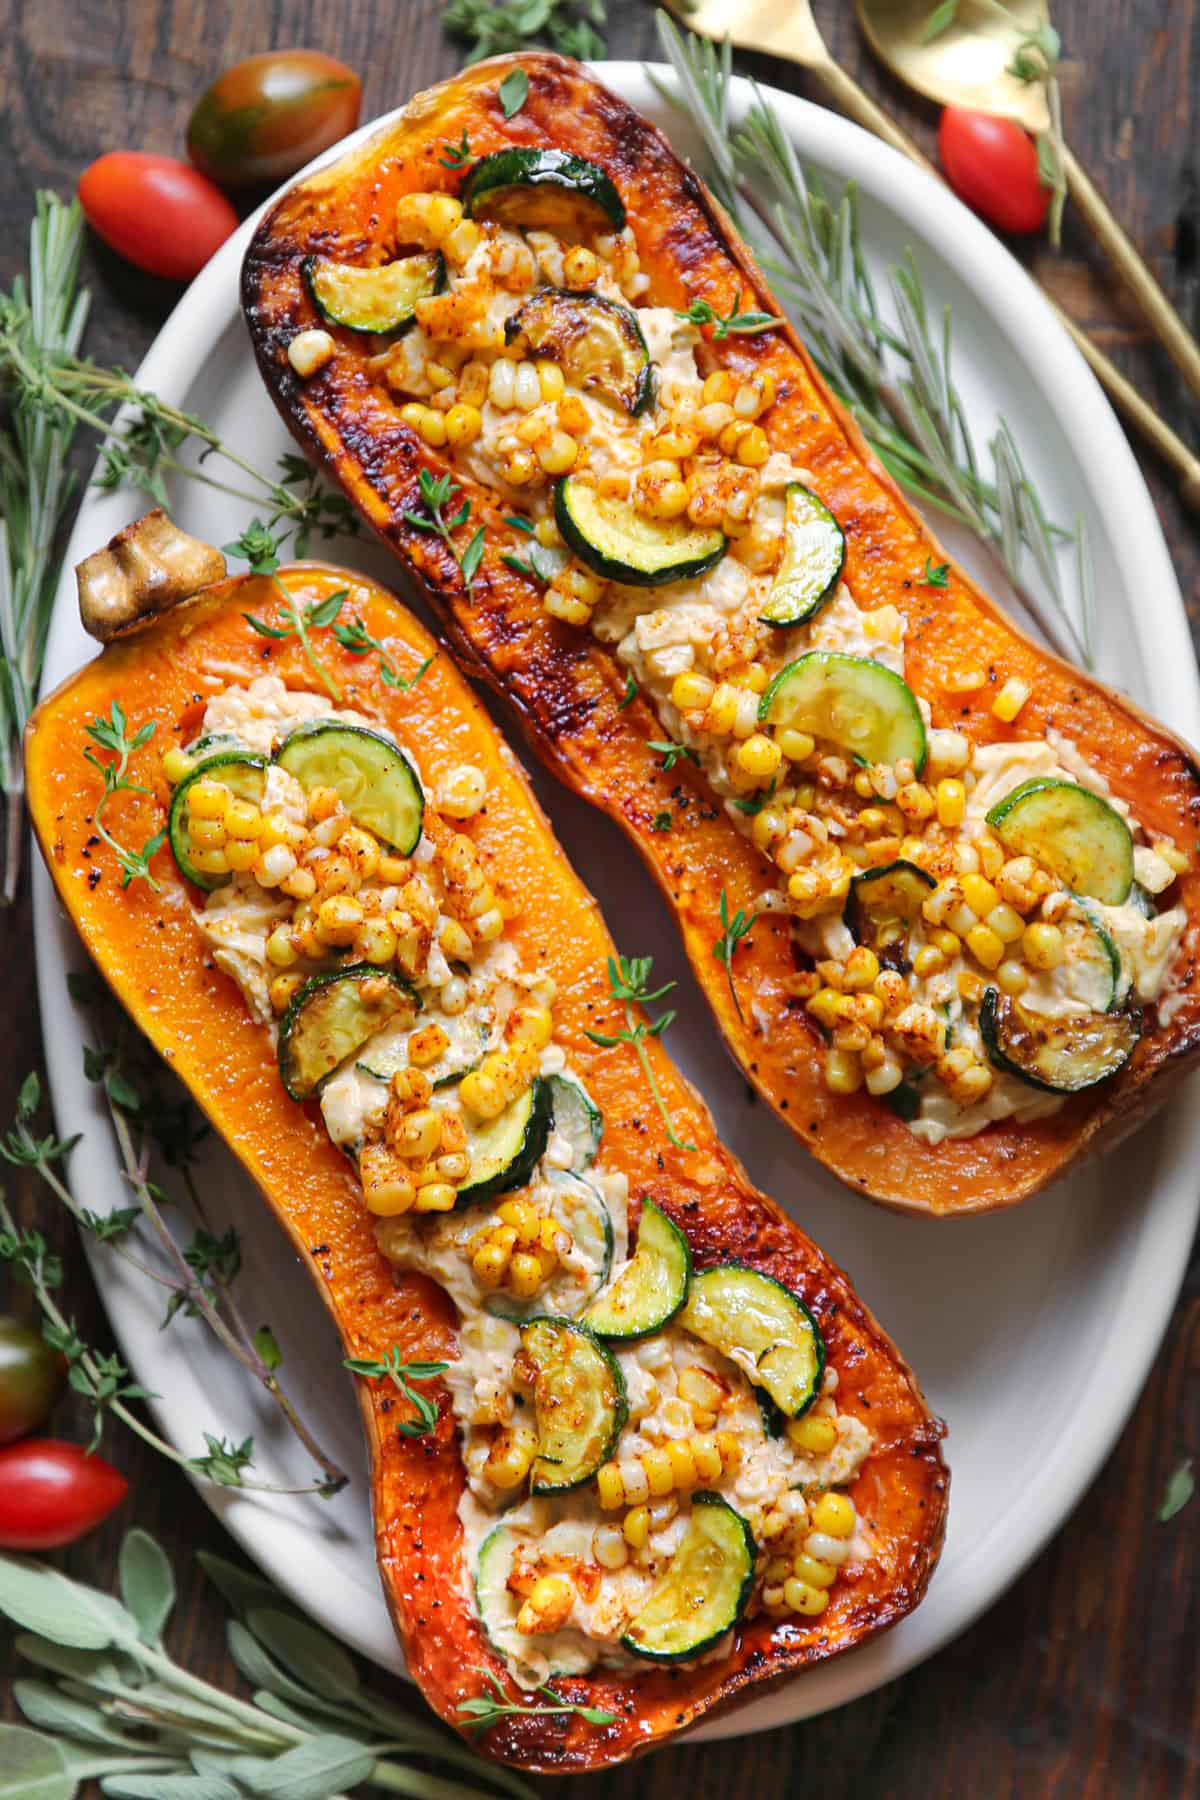 Roasted Butternut Squash (2 halves) stuffed with Corn, Zucchini, and Cheese - on a white platter.